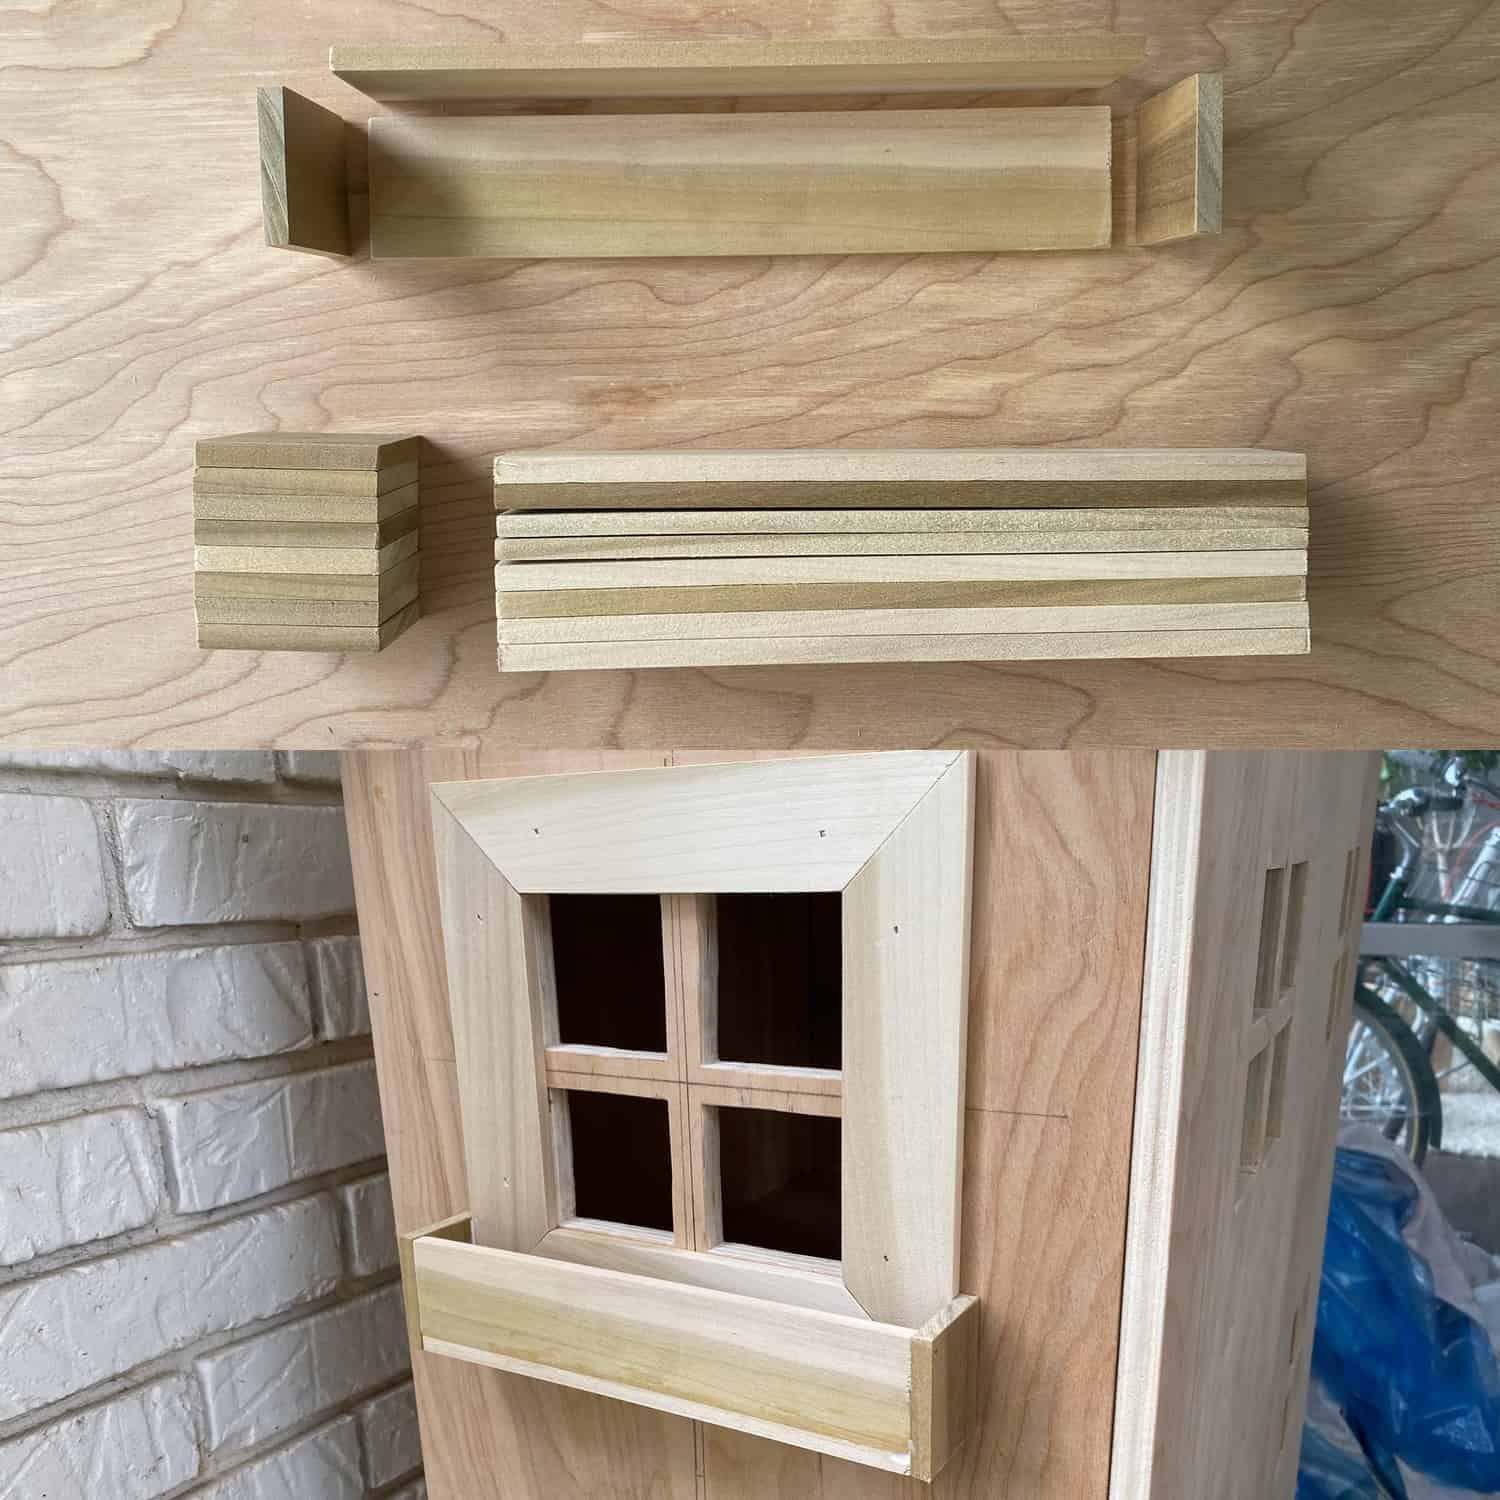 pieces of wood together and a view of a window in the plywood